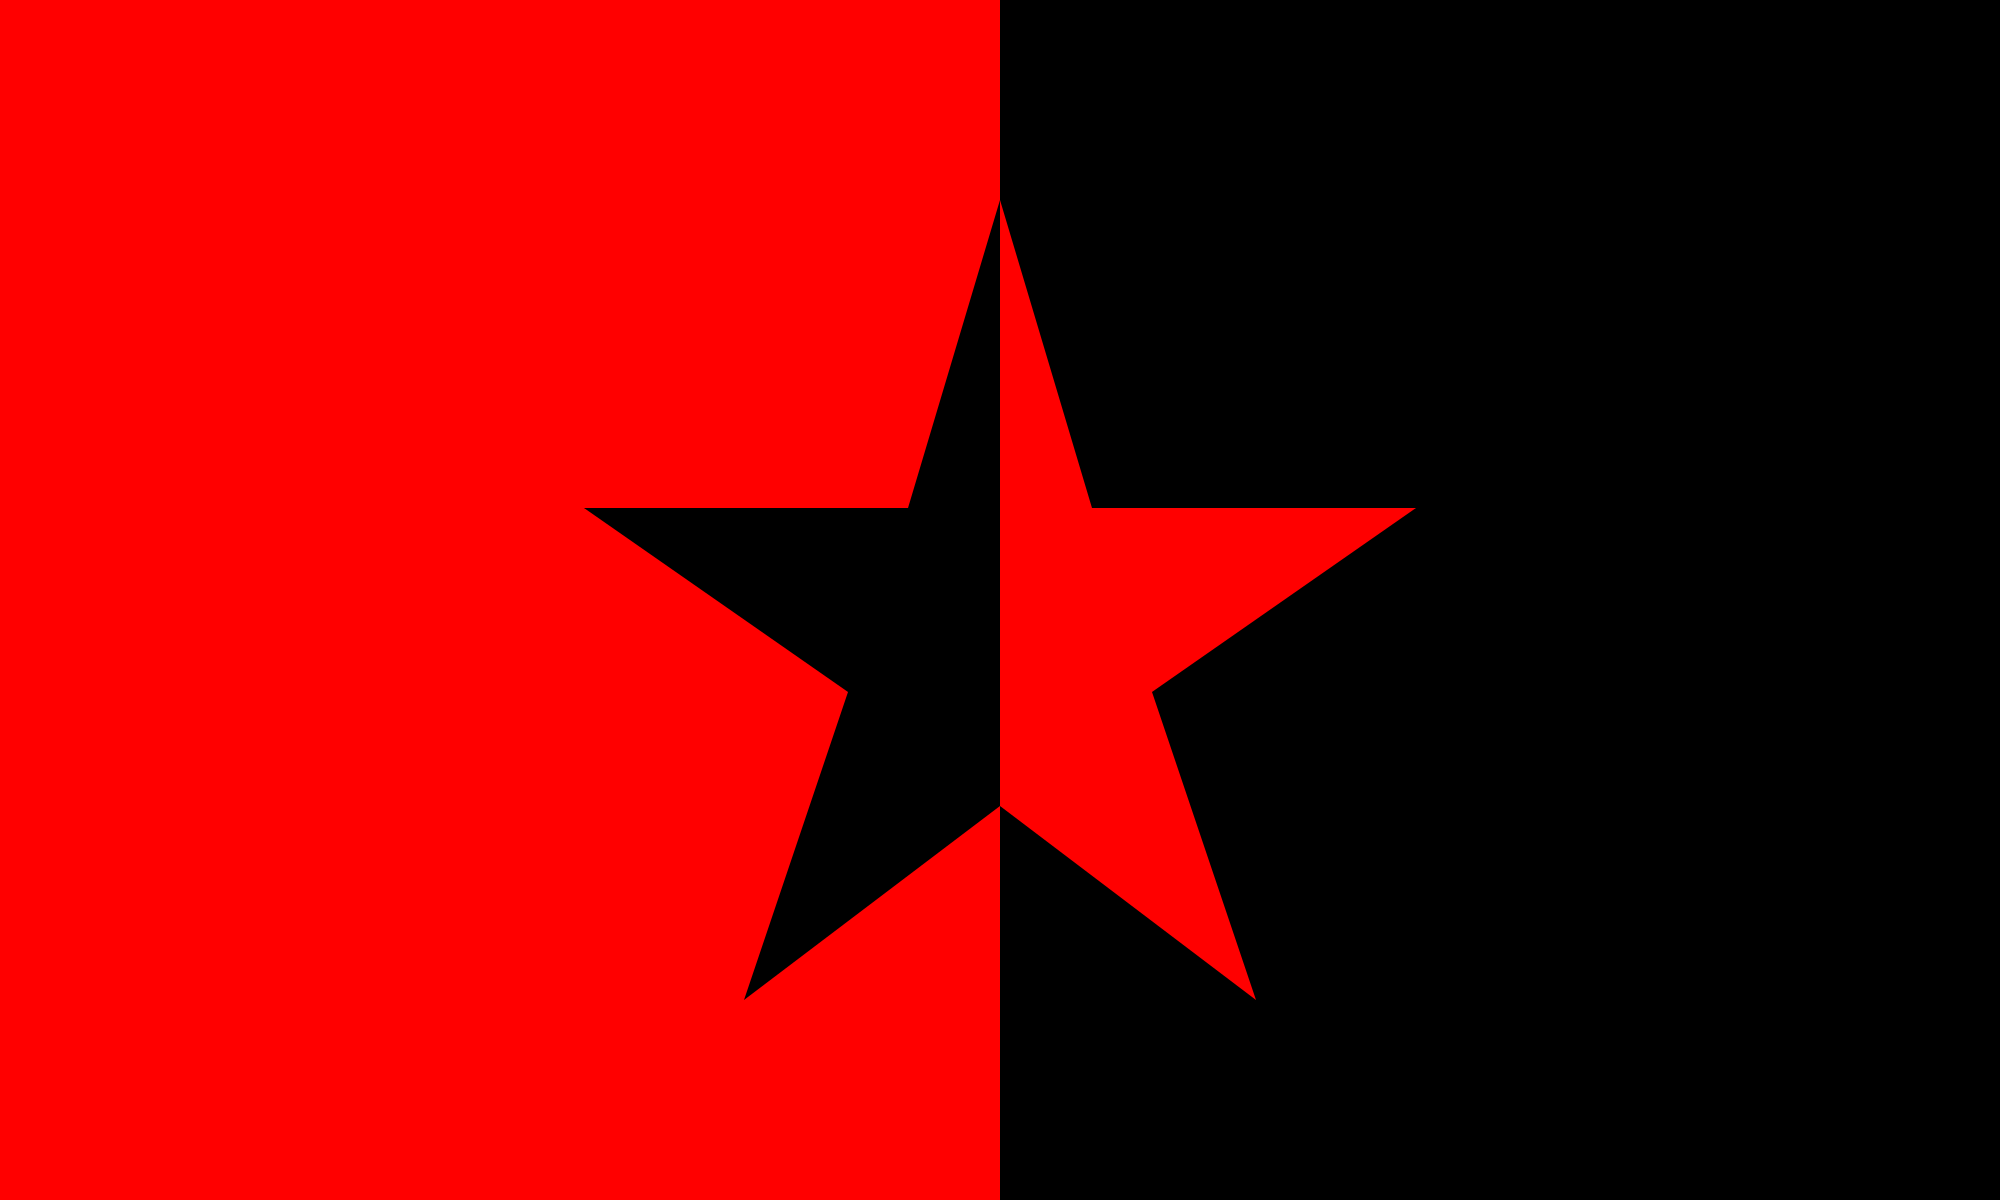 Black and Red F Logo - File:Red black star flag.svg - Wikimedia Commons